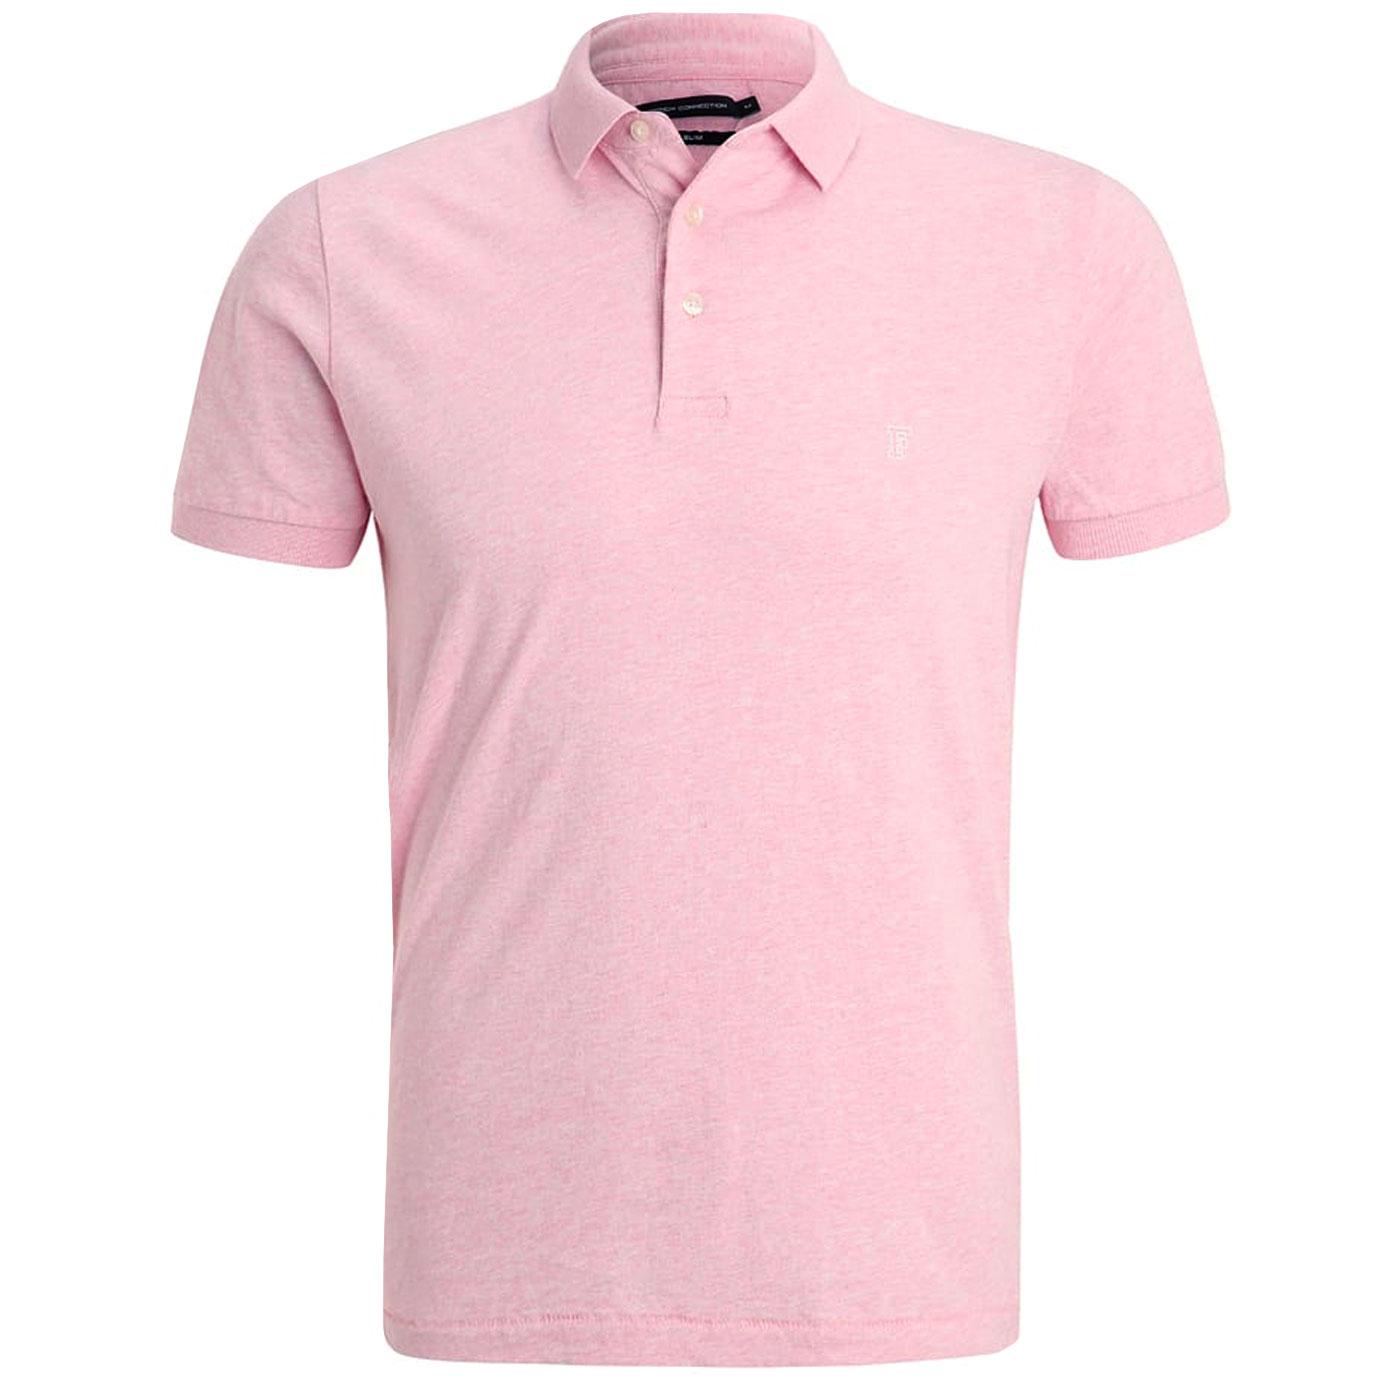 Sneezy FRENCH CONNECTION Retro Mod Polo Top (PM)